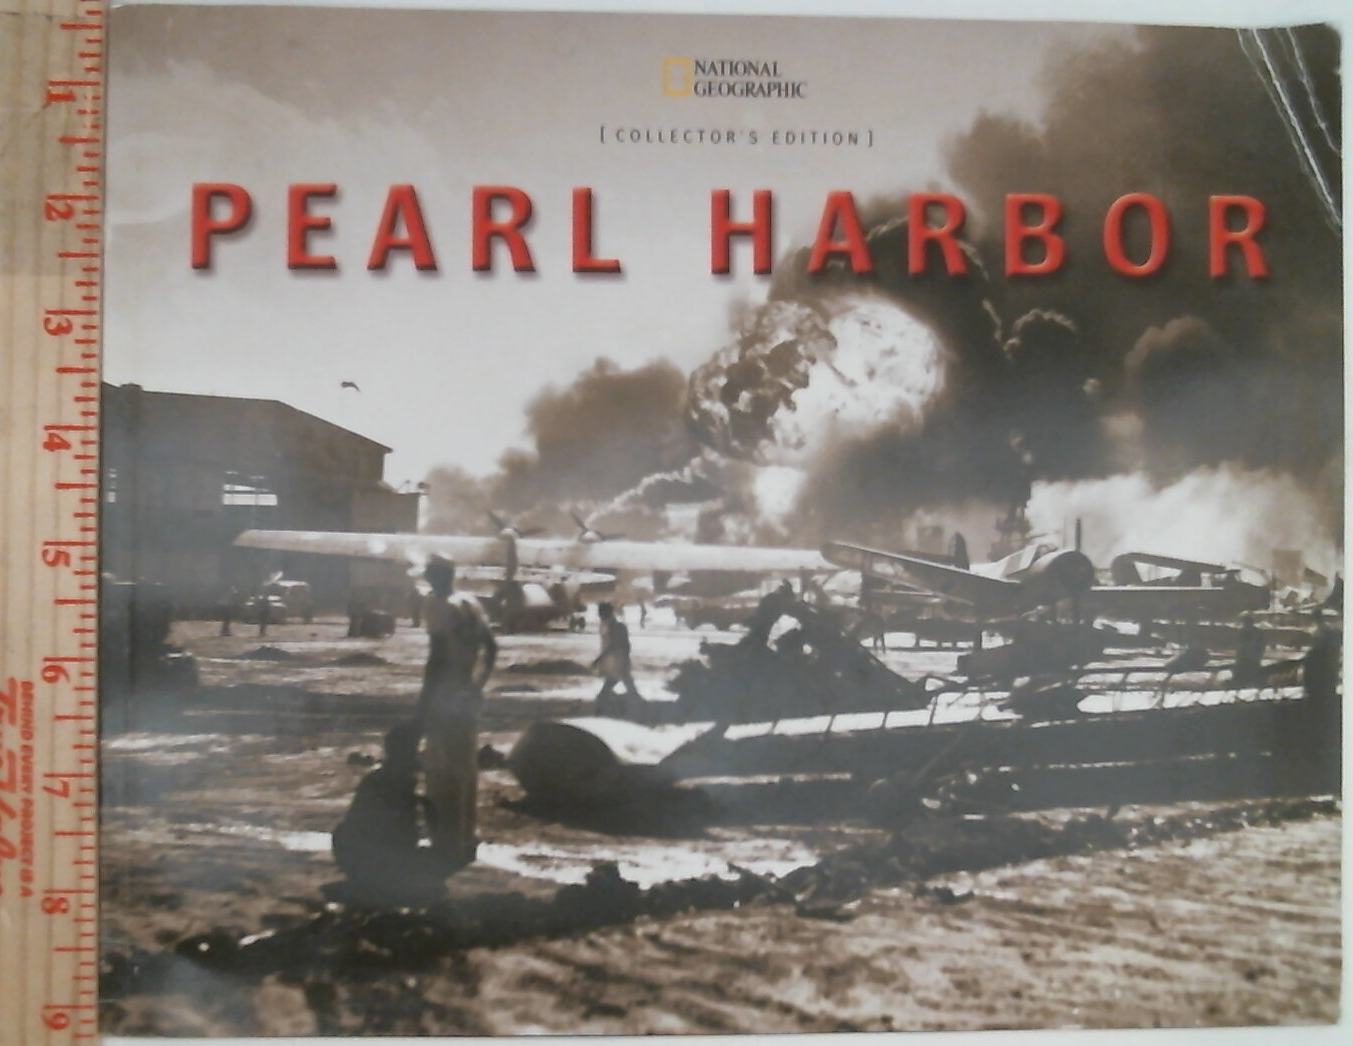 Pearl Harbor National Geographic Collector